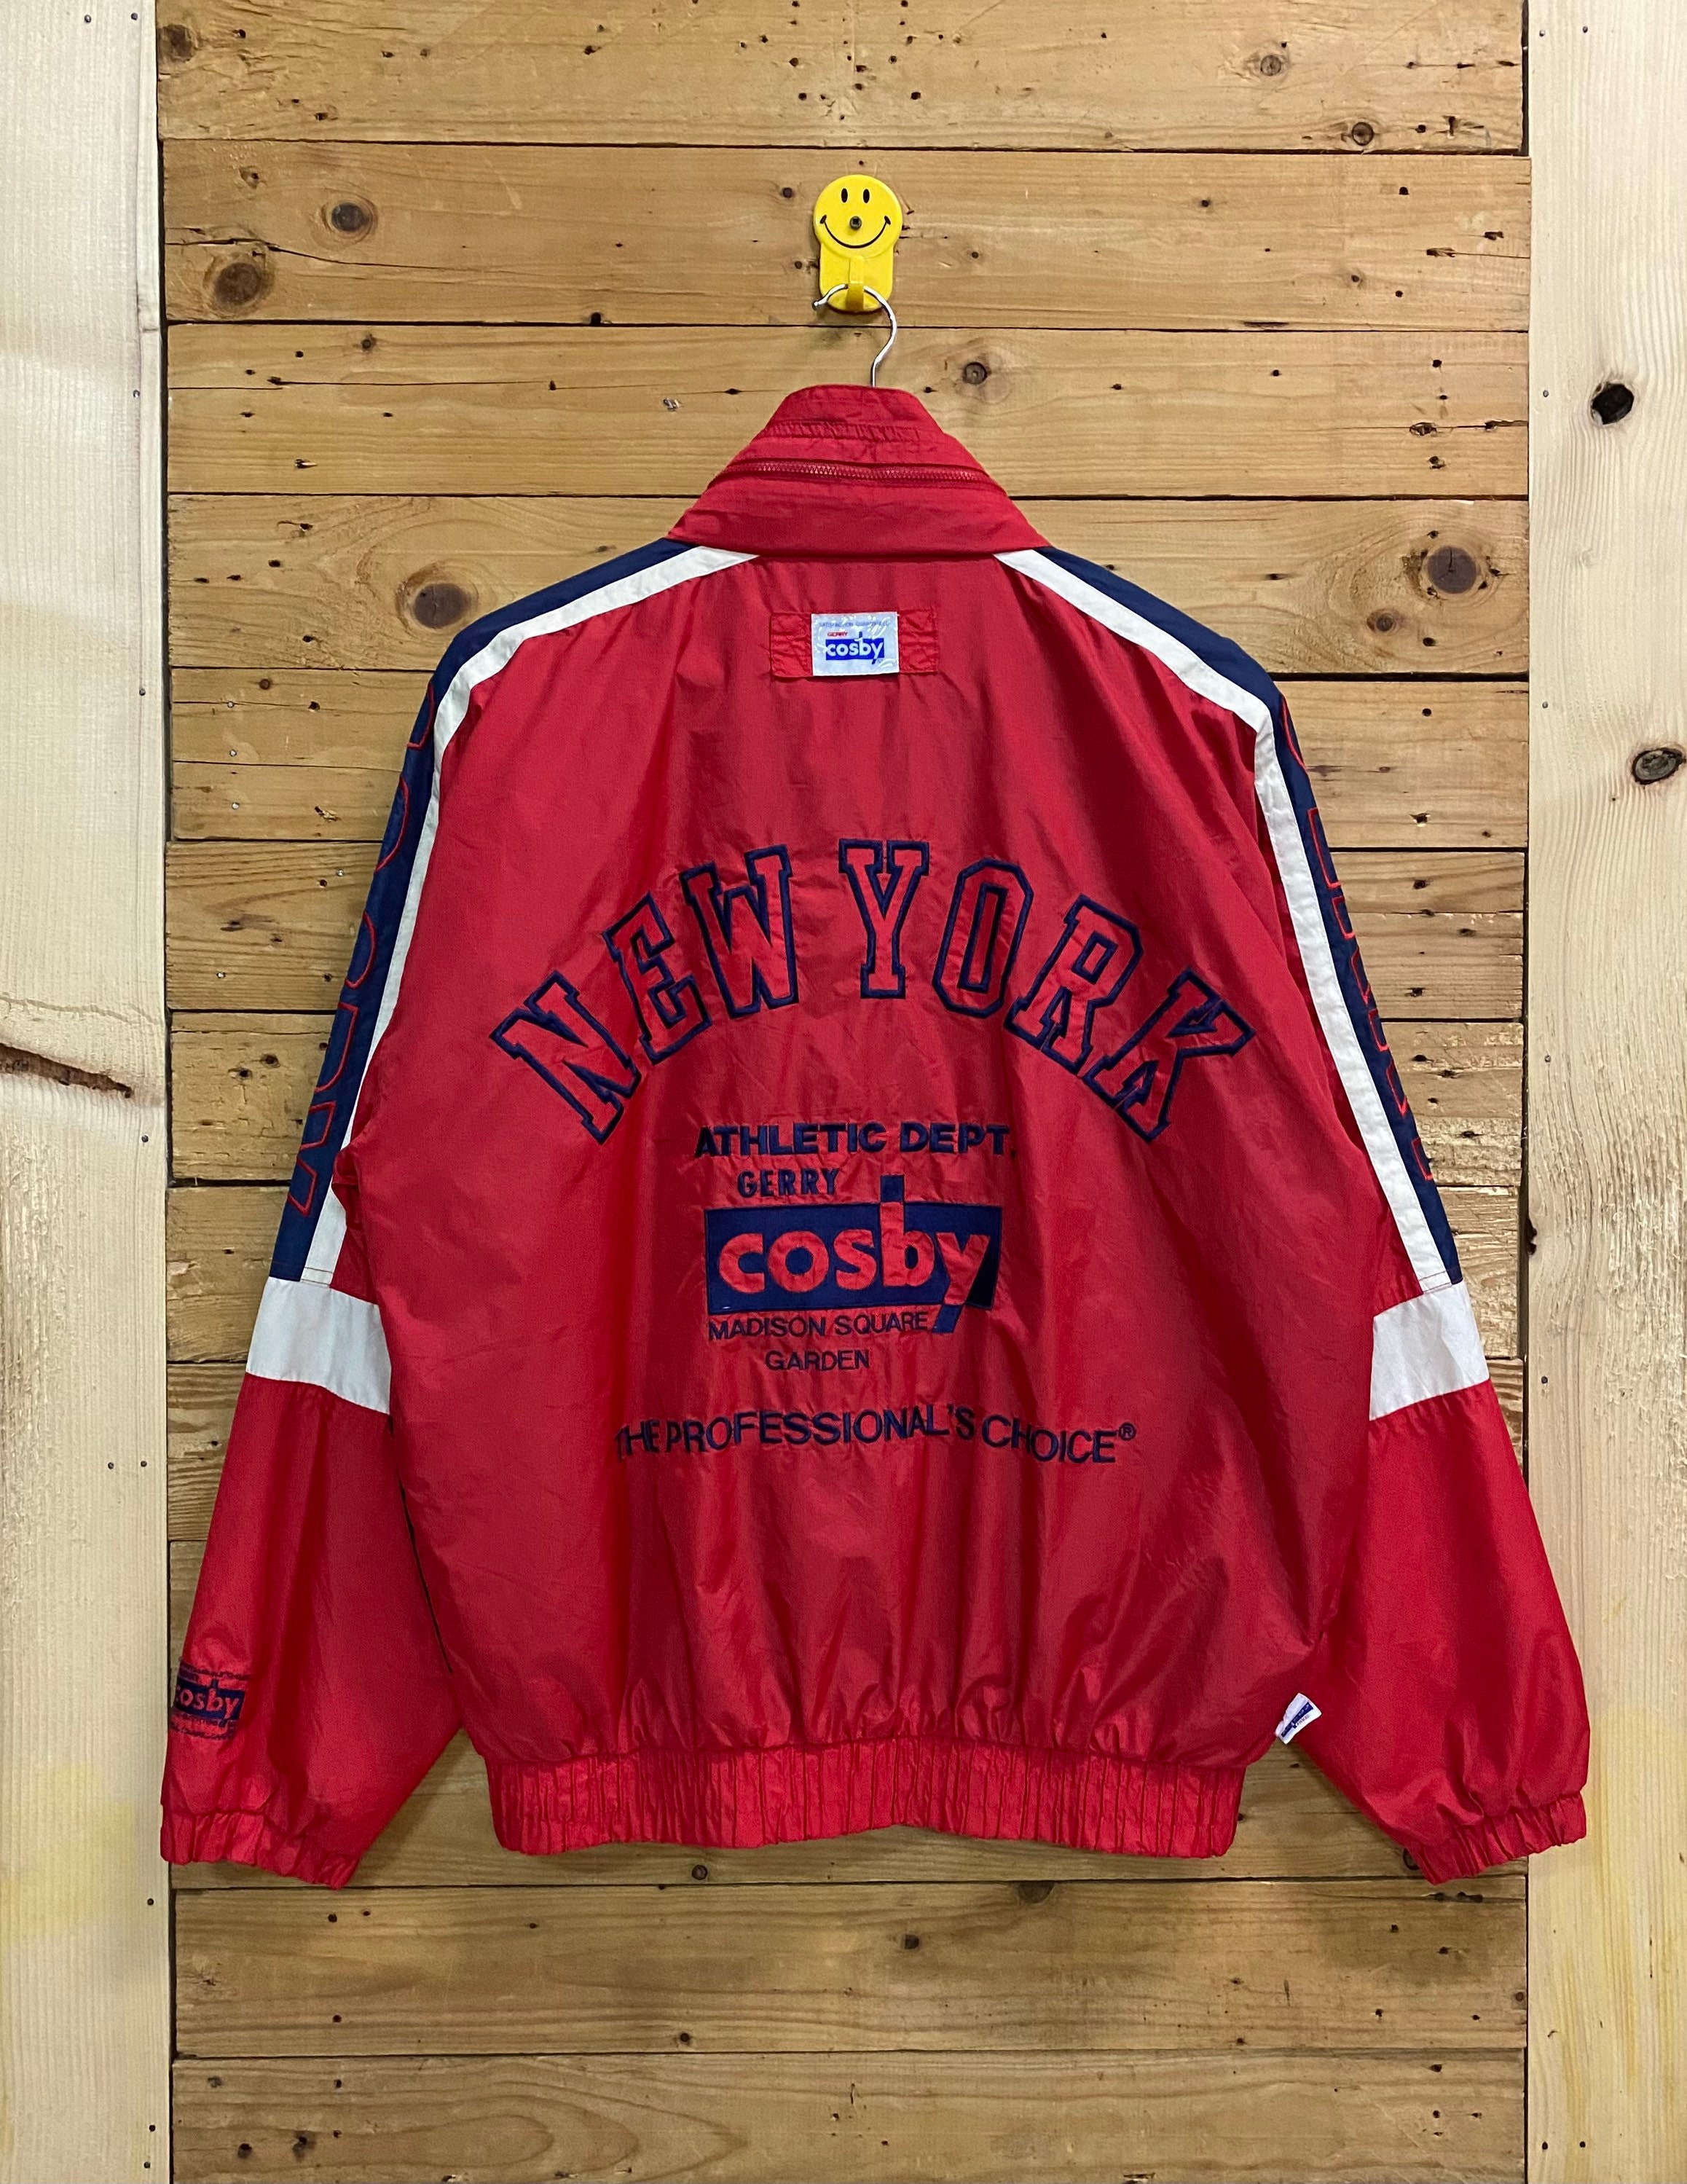 Vintage Gerry Cosby Athletic Outfitters, Women's Fashion, Tops, Longsleeves  on Carousell